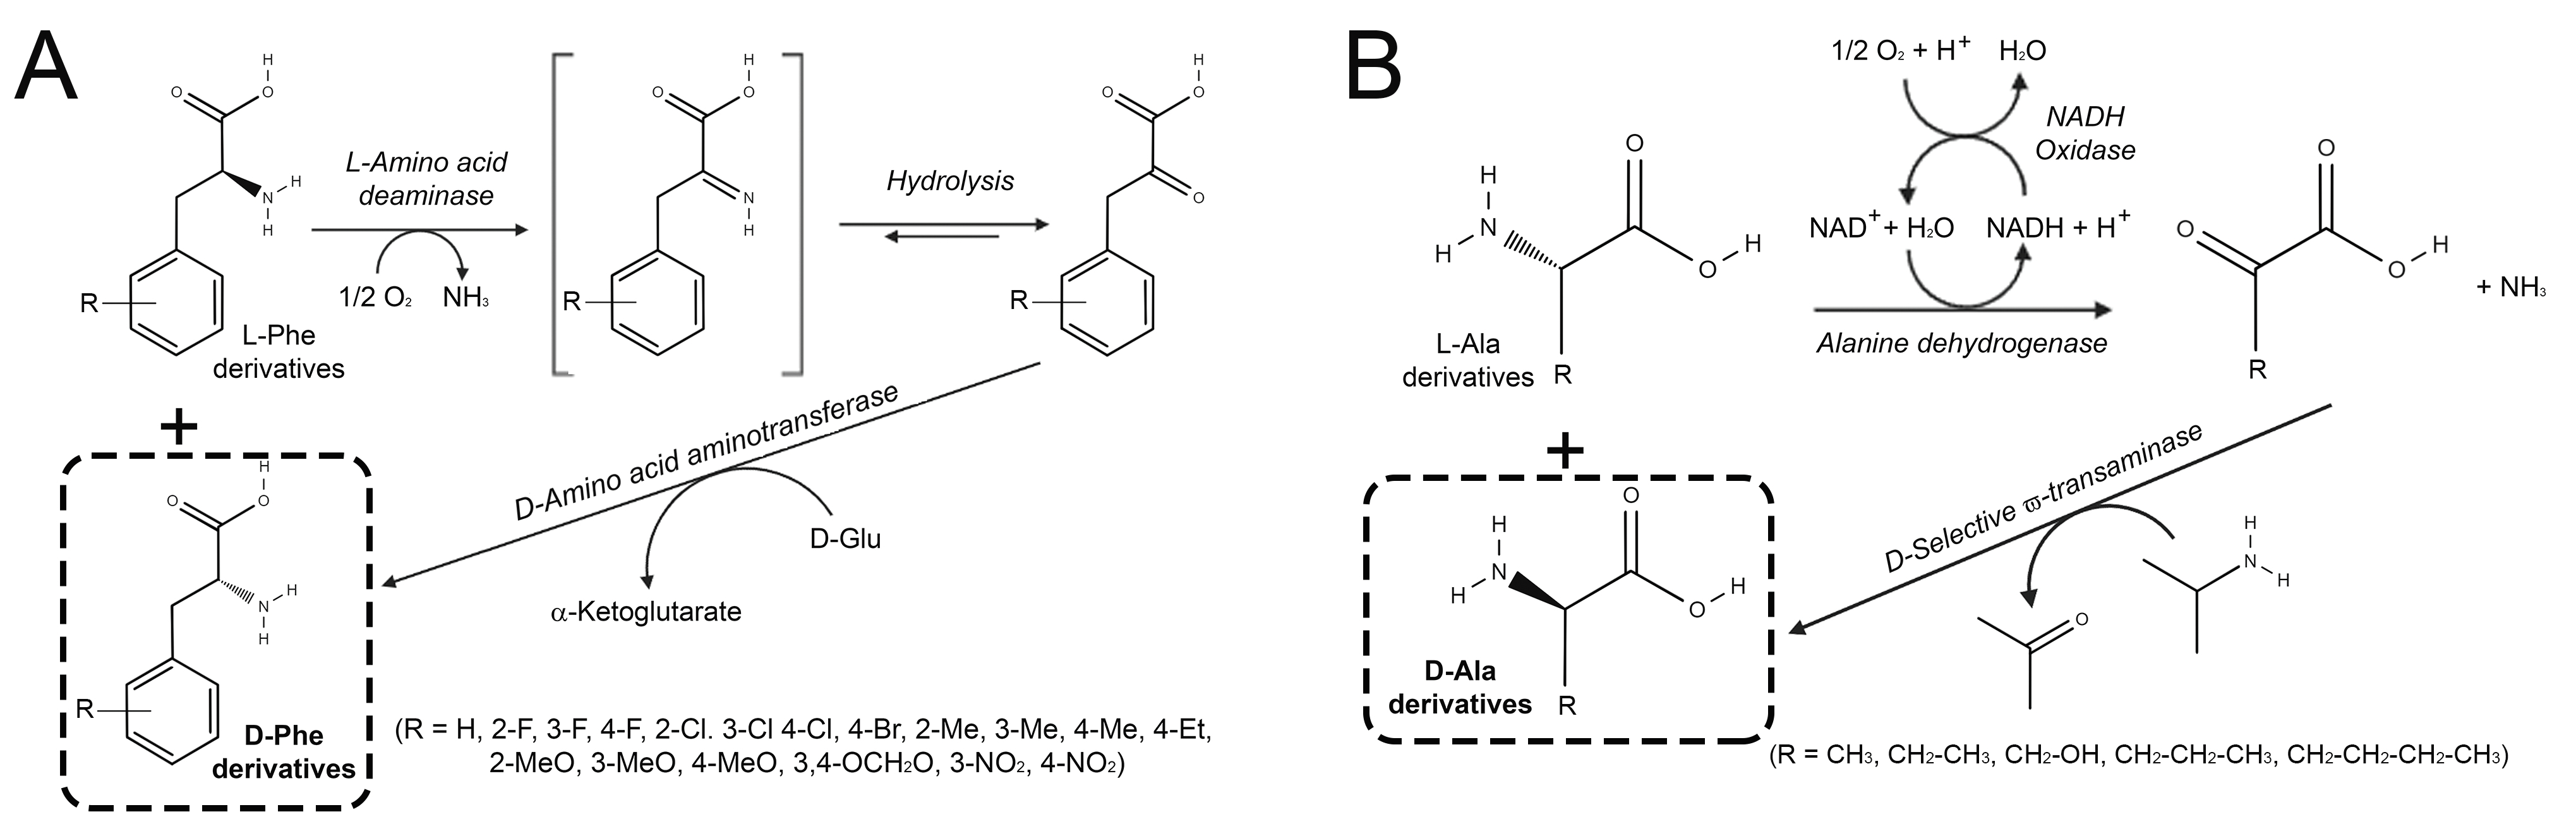 Ijms Free Full Text Advances In Enzymatic Synthesis Of D Amino Acids Html